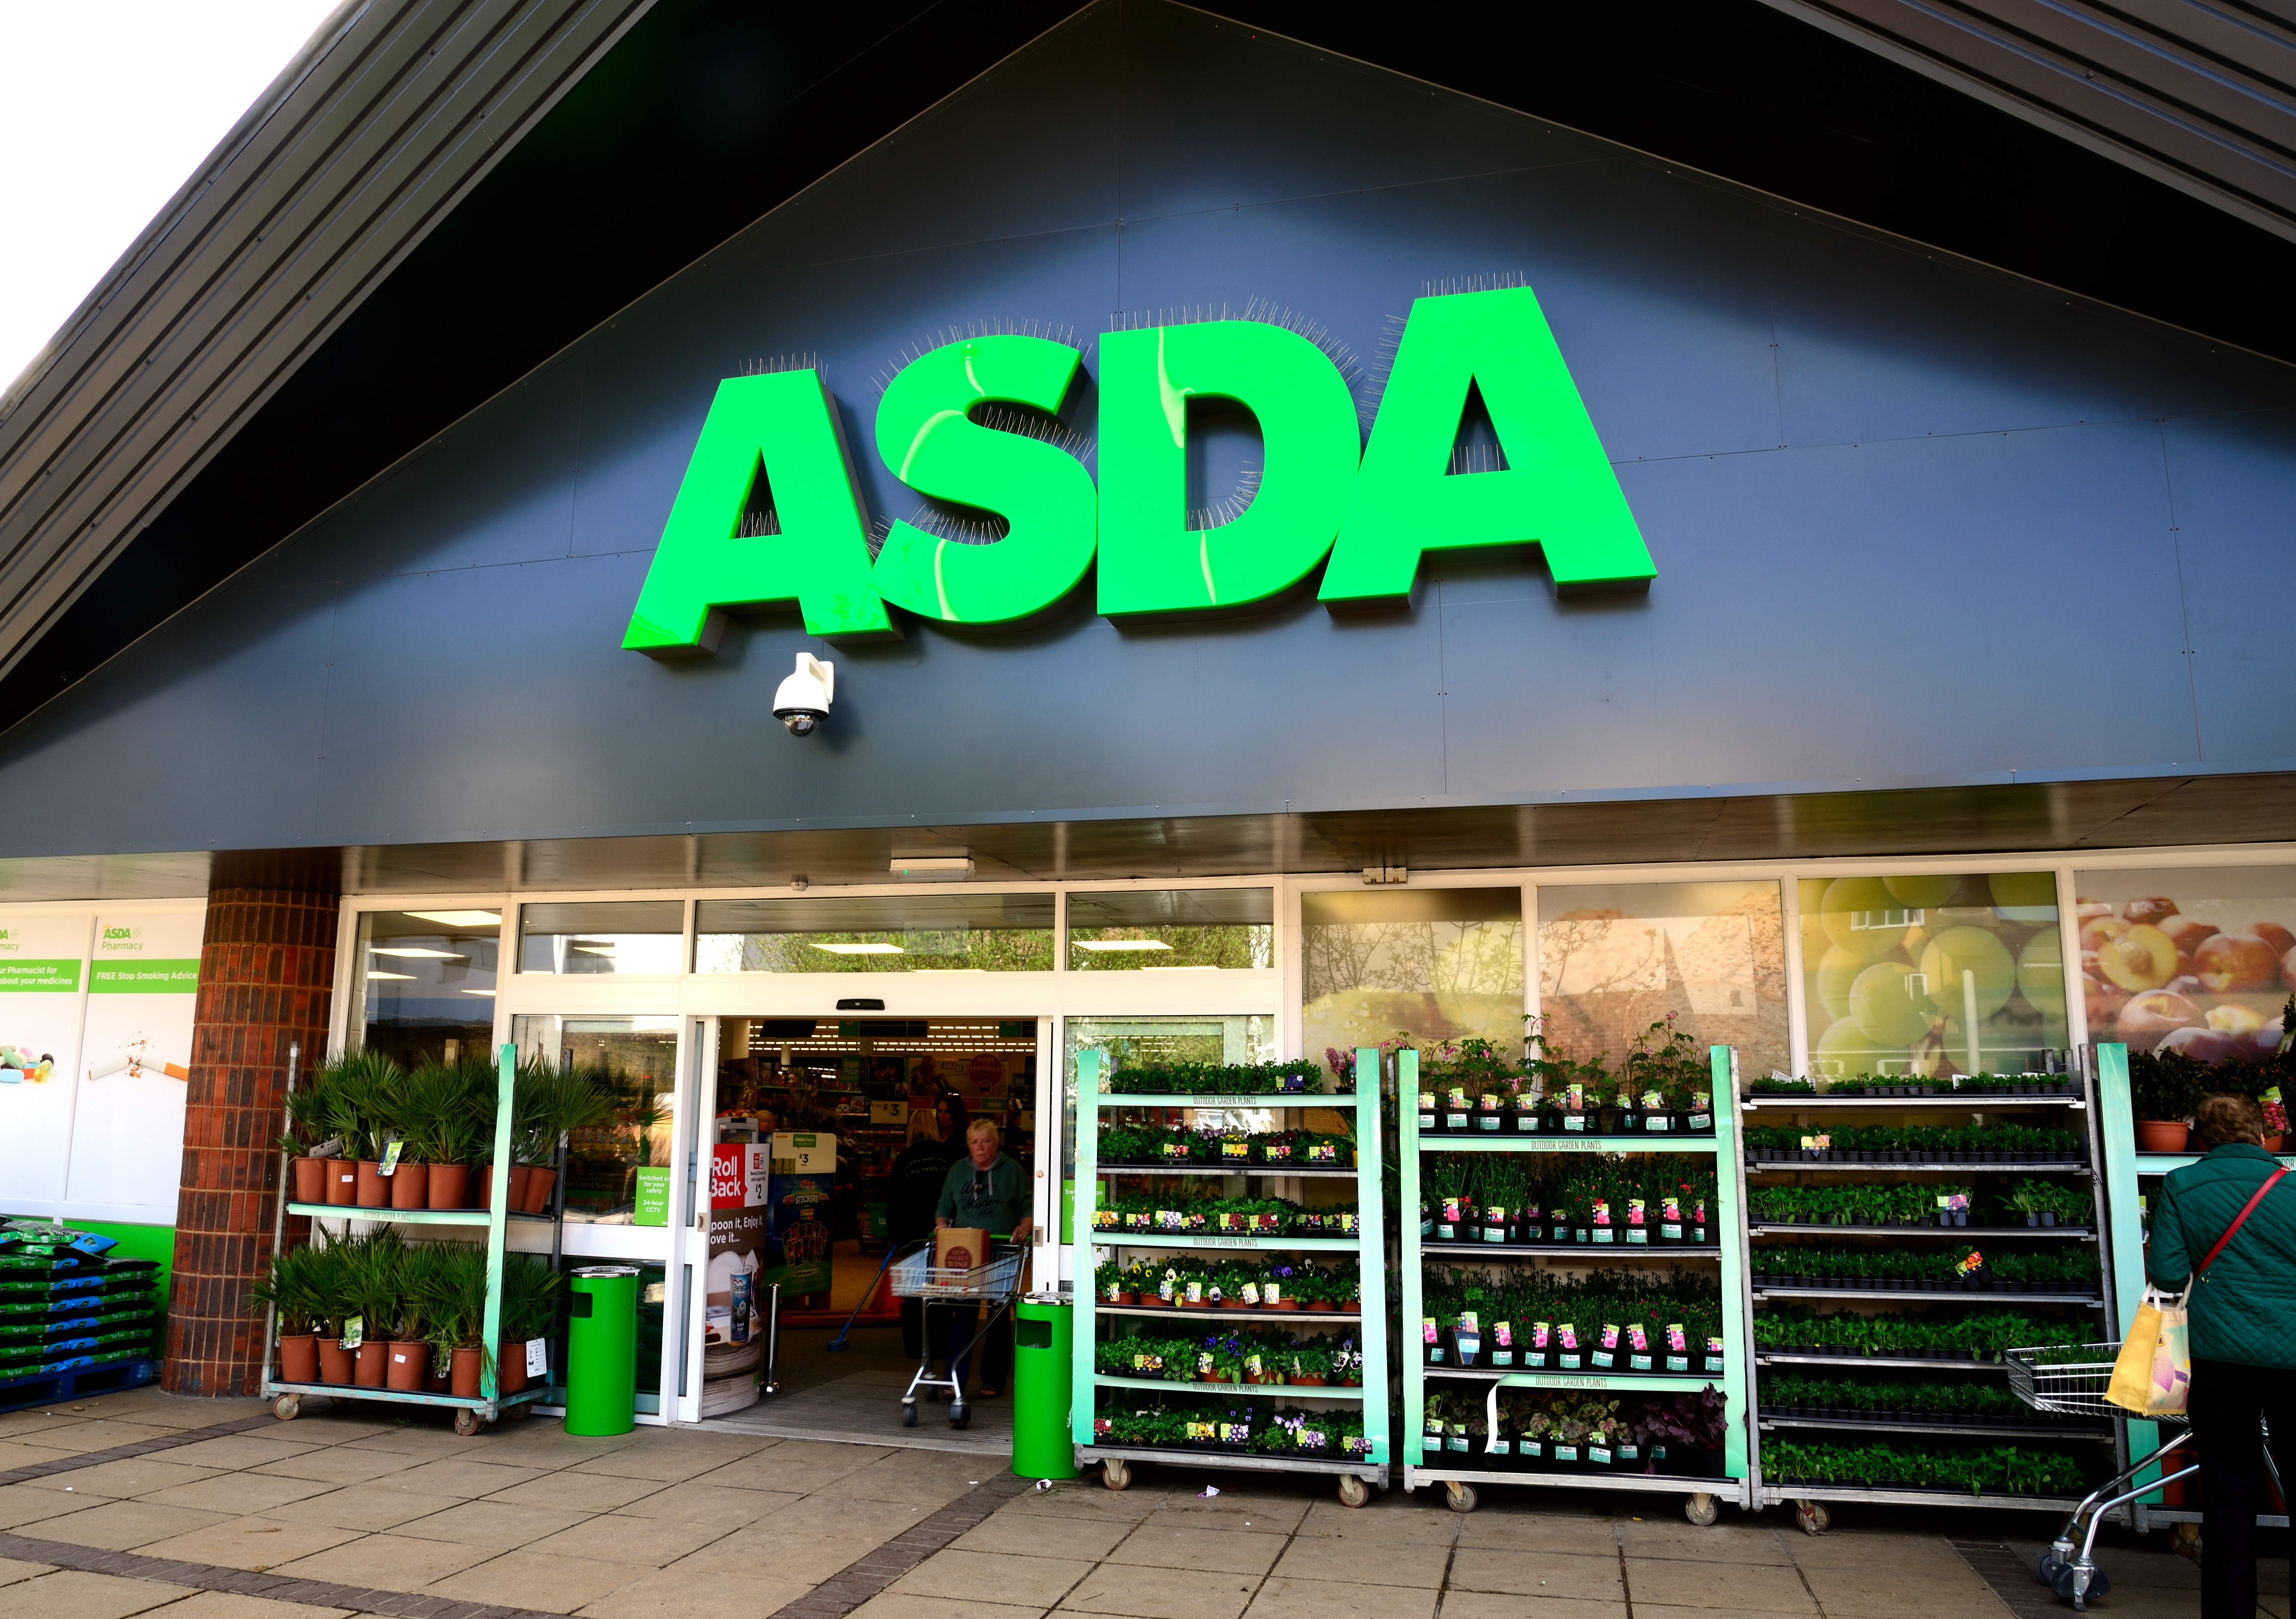 Waterlooville, UK – May 2, 2018: Asda Stores Ltd. trading as Asda, is a British supermarket retailer. The logo is prominent above the glass fronted store-front. Advertising, products and Sshoppers are all visible.